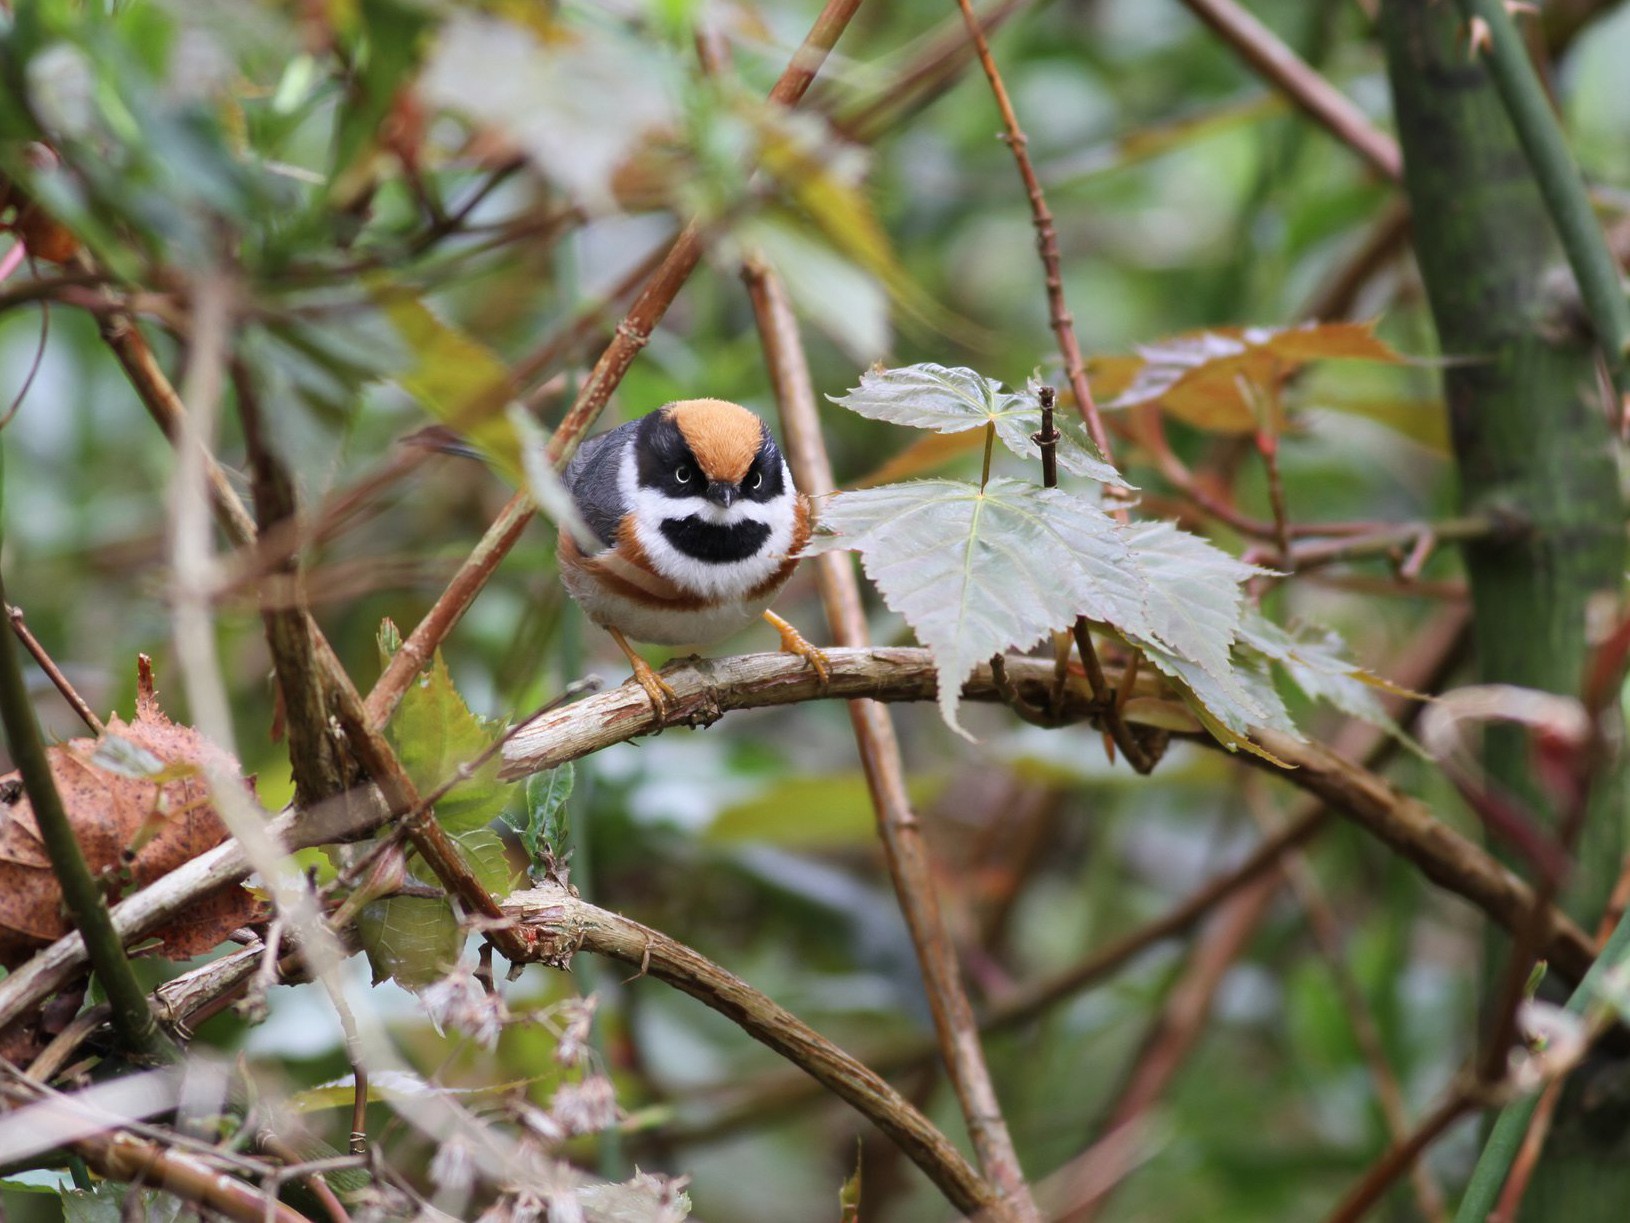 Black-throated Tit - Ting-Wei (廷維) HUNG (洪)